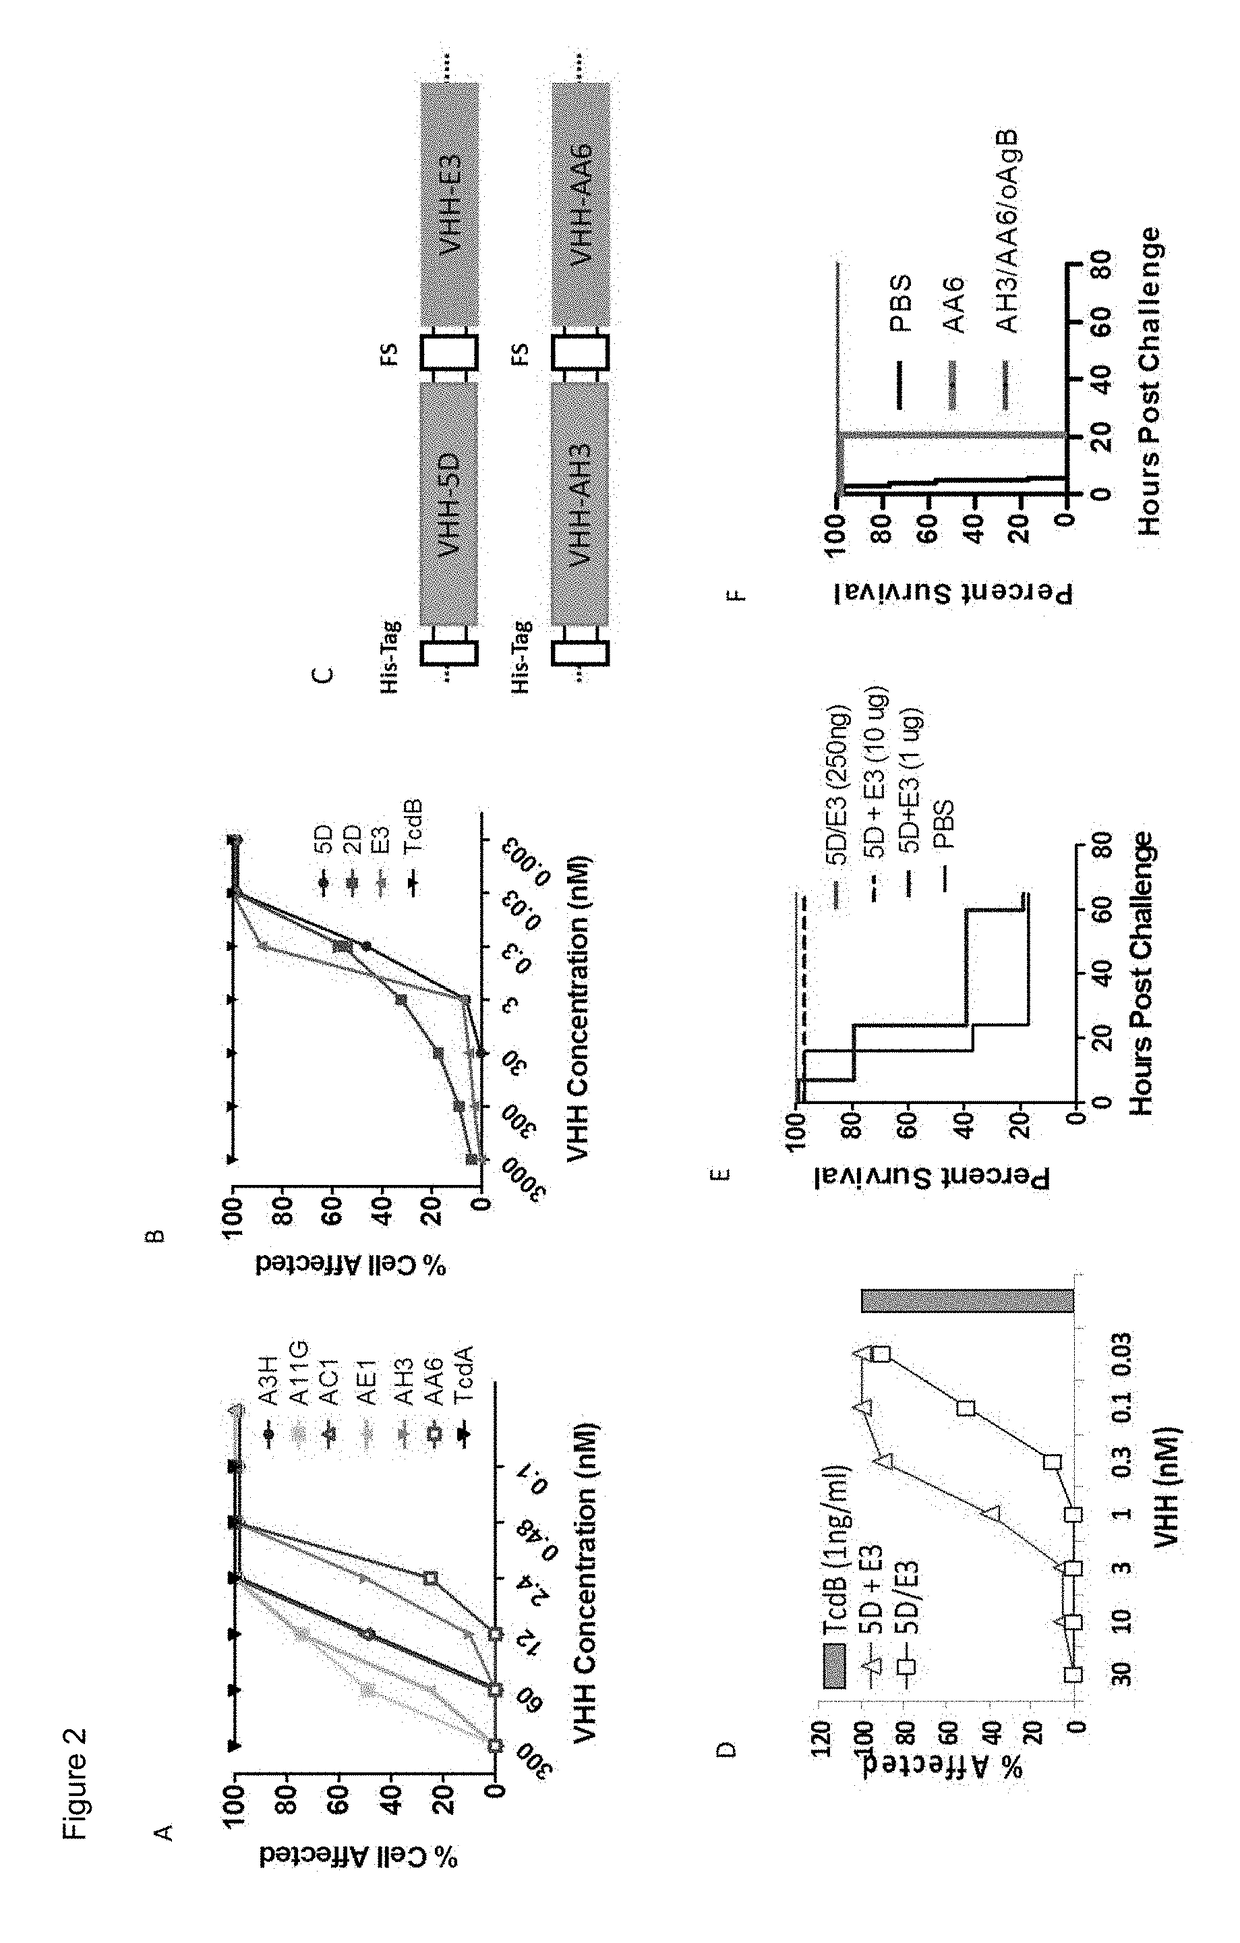 Tetra-specific, octameric binding agents and antibodies against clostridium difficile toxin a and toxin b for treatment of c. difficile infection